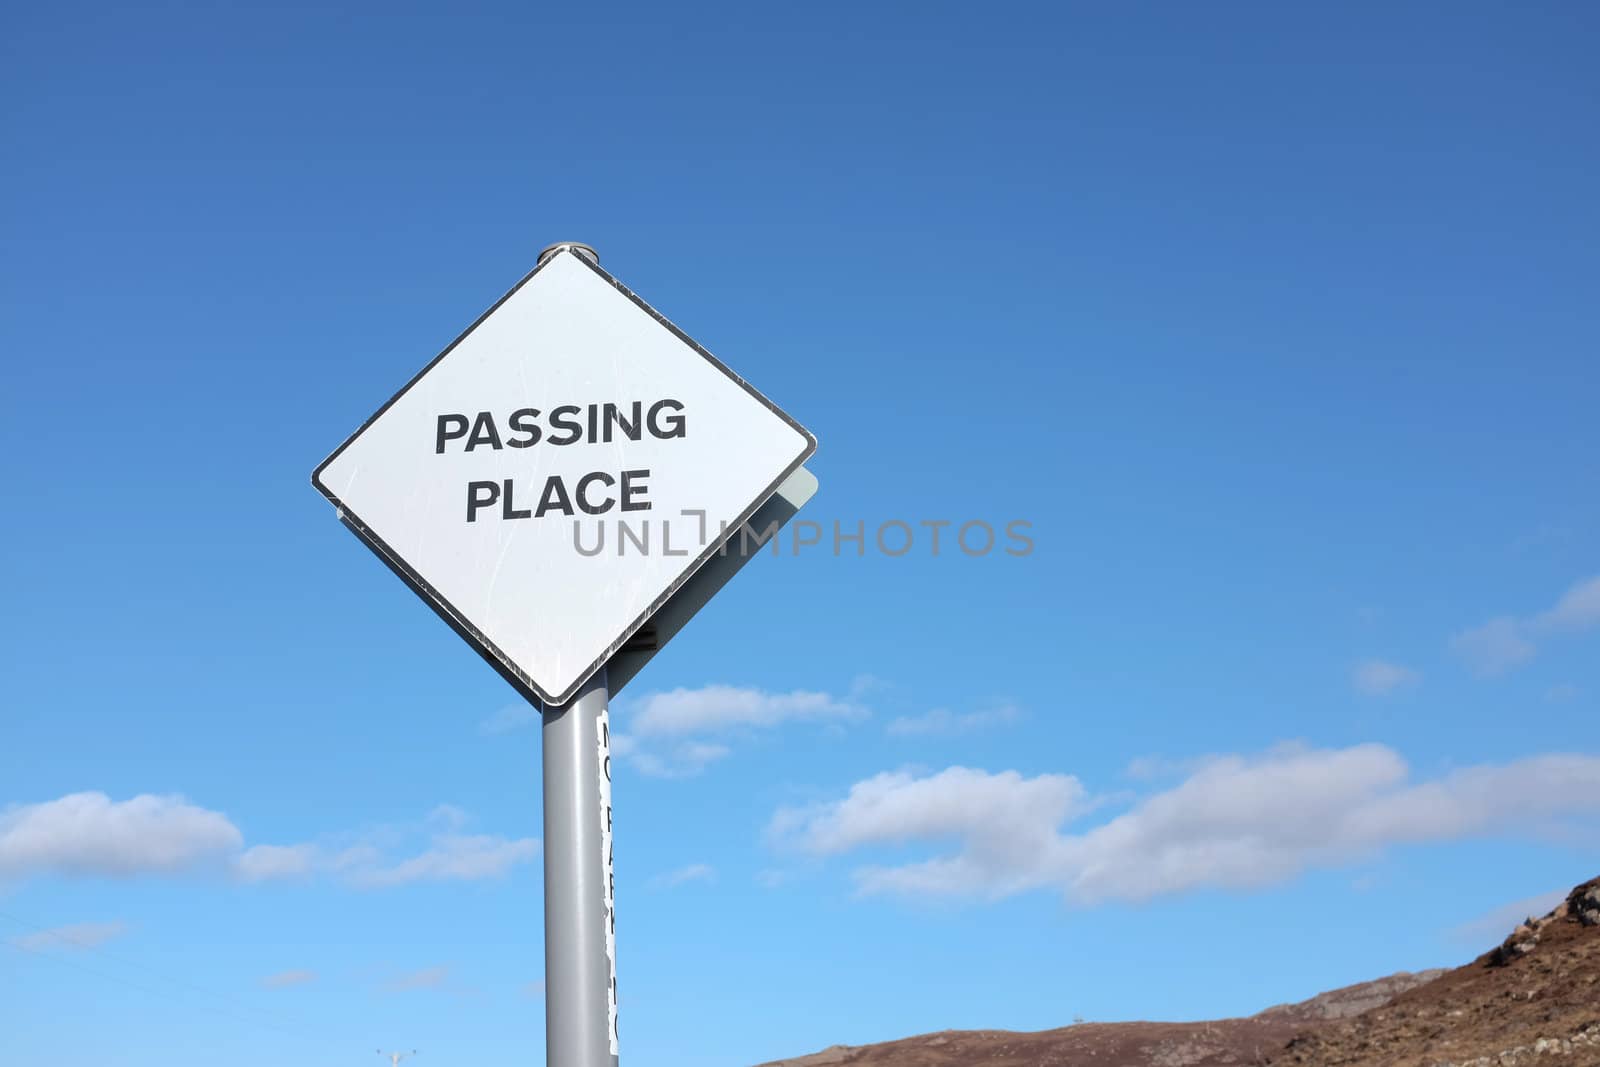 A white diamond shaped road sign with the words 'PASSING PLACE' written in black, against a blue sky with cloud,